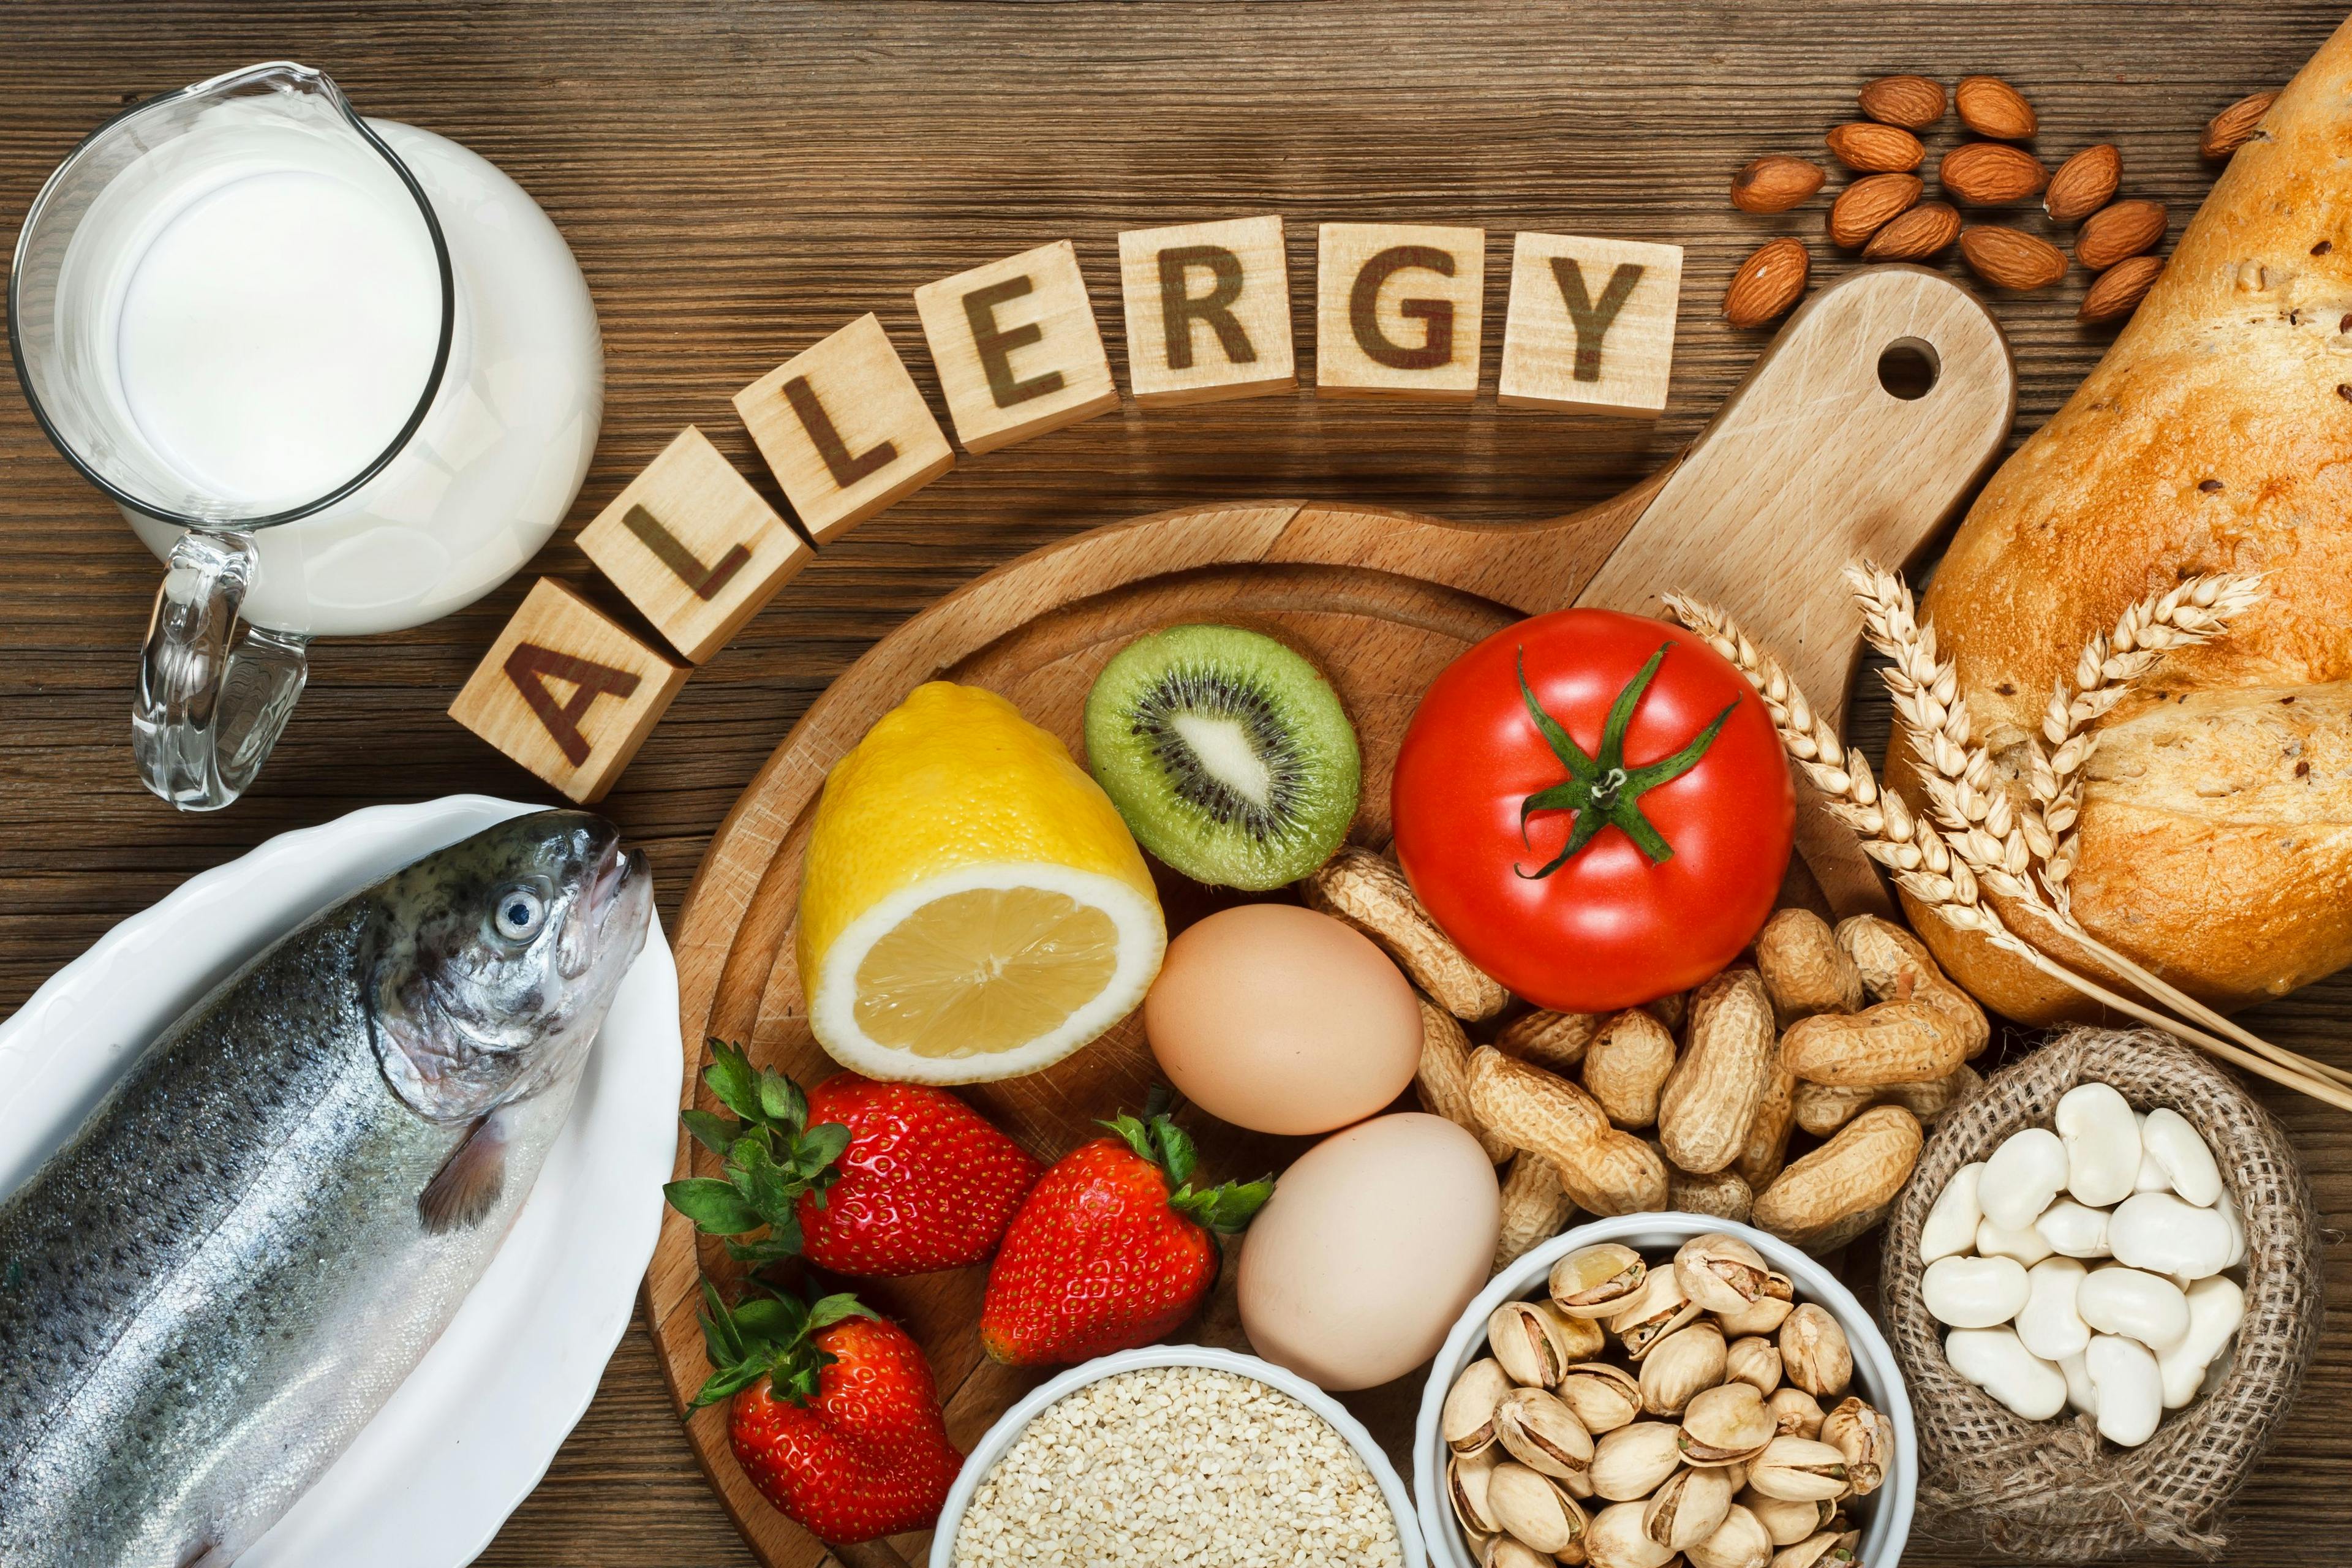 Study: Parents, Guardians Also Experience Bullying Over Child’s Food Allergies